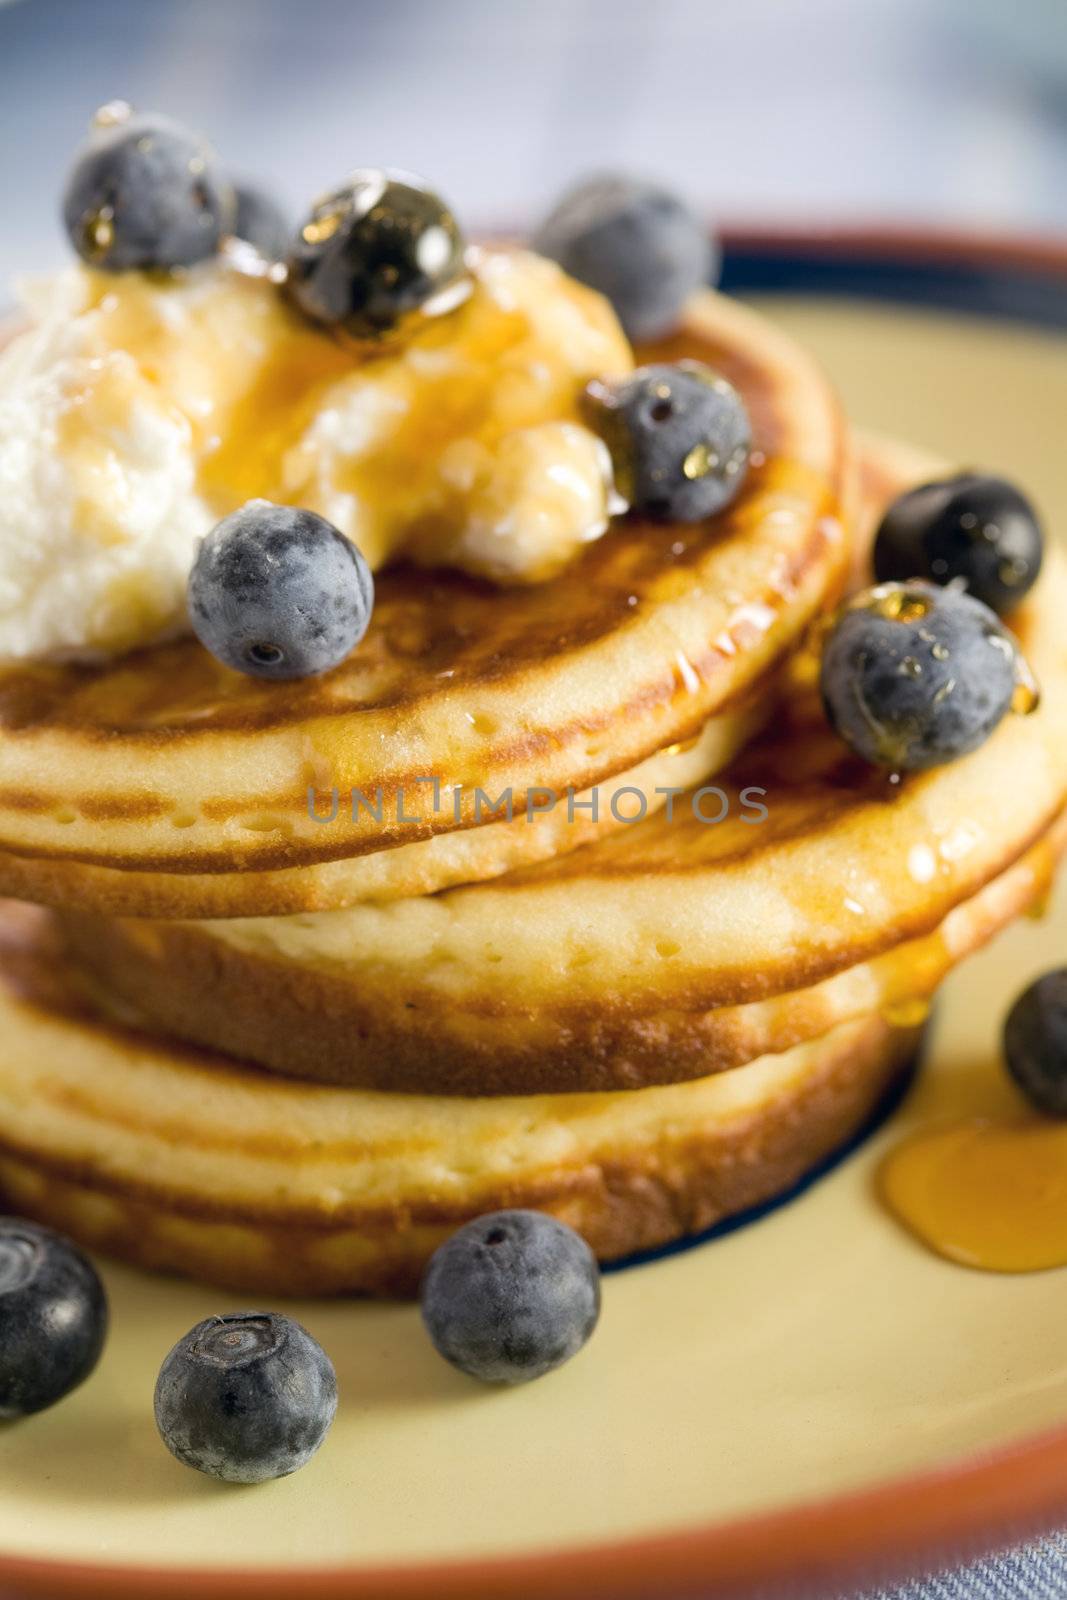 Blue berry pancakes by Fotosmurf